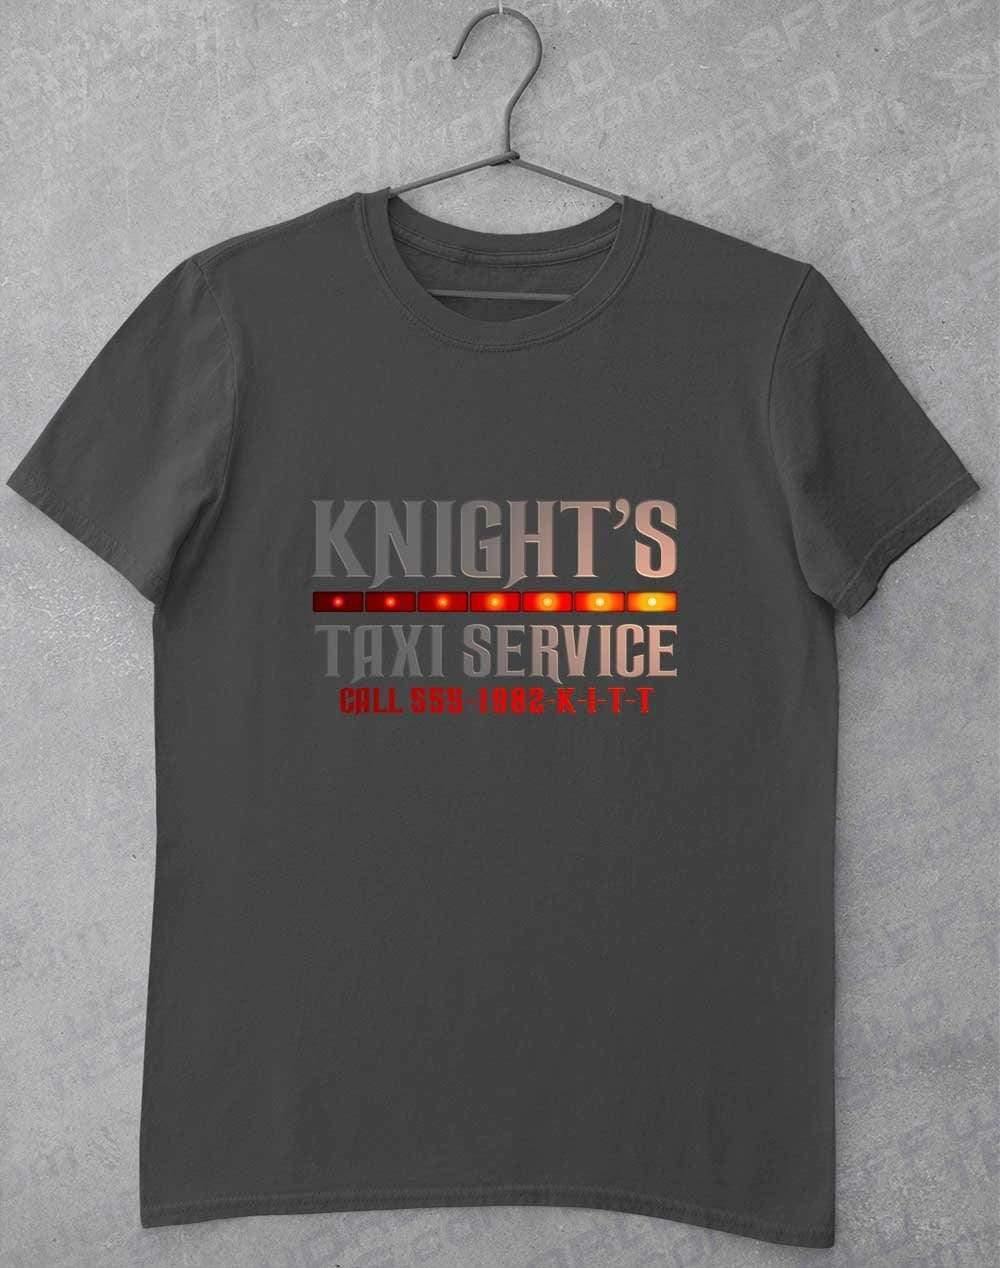 Knight's Taxi Sevice T-Shirt  - Off World Tees